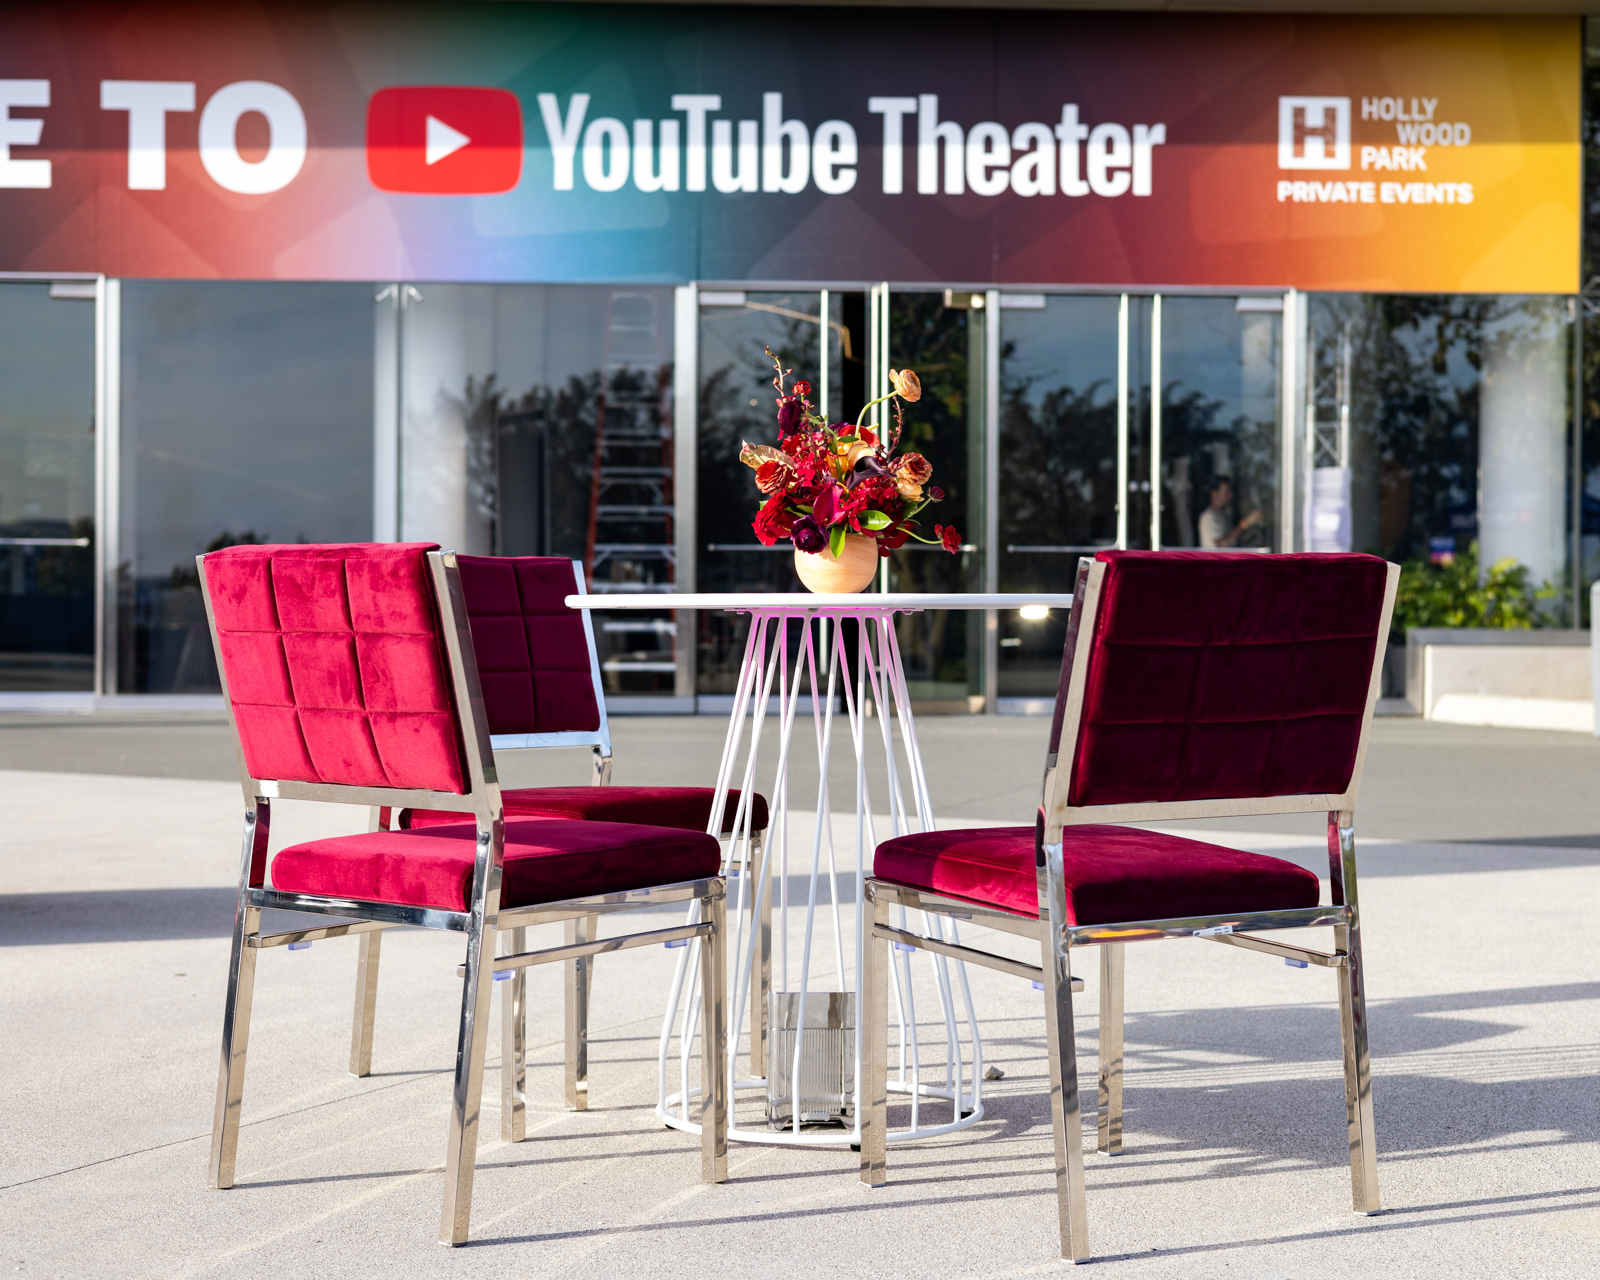 YouTube theater events